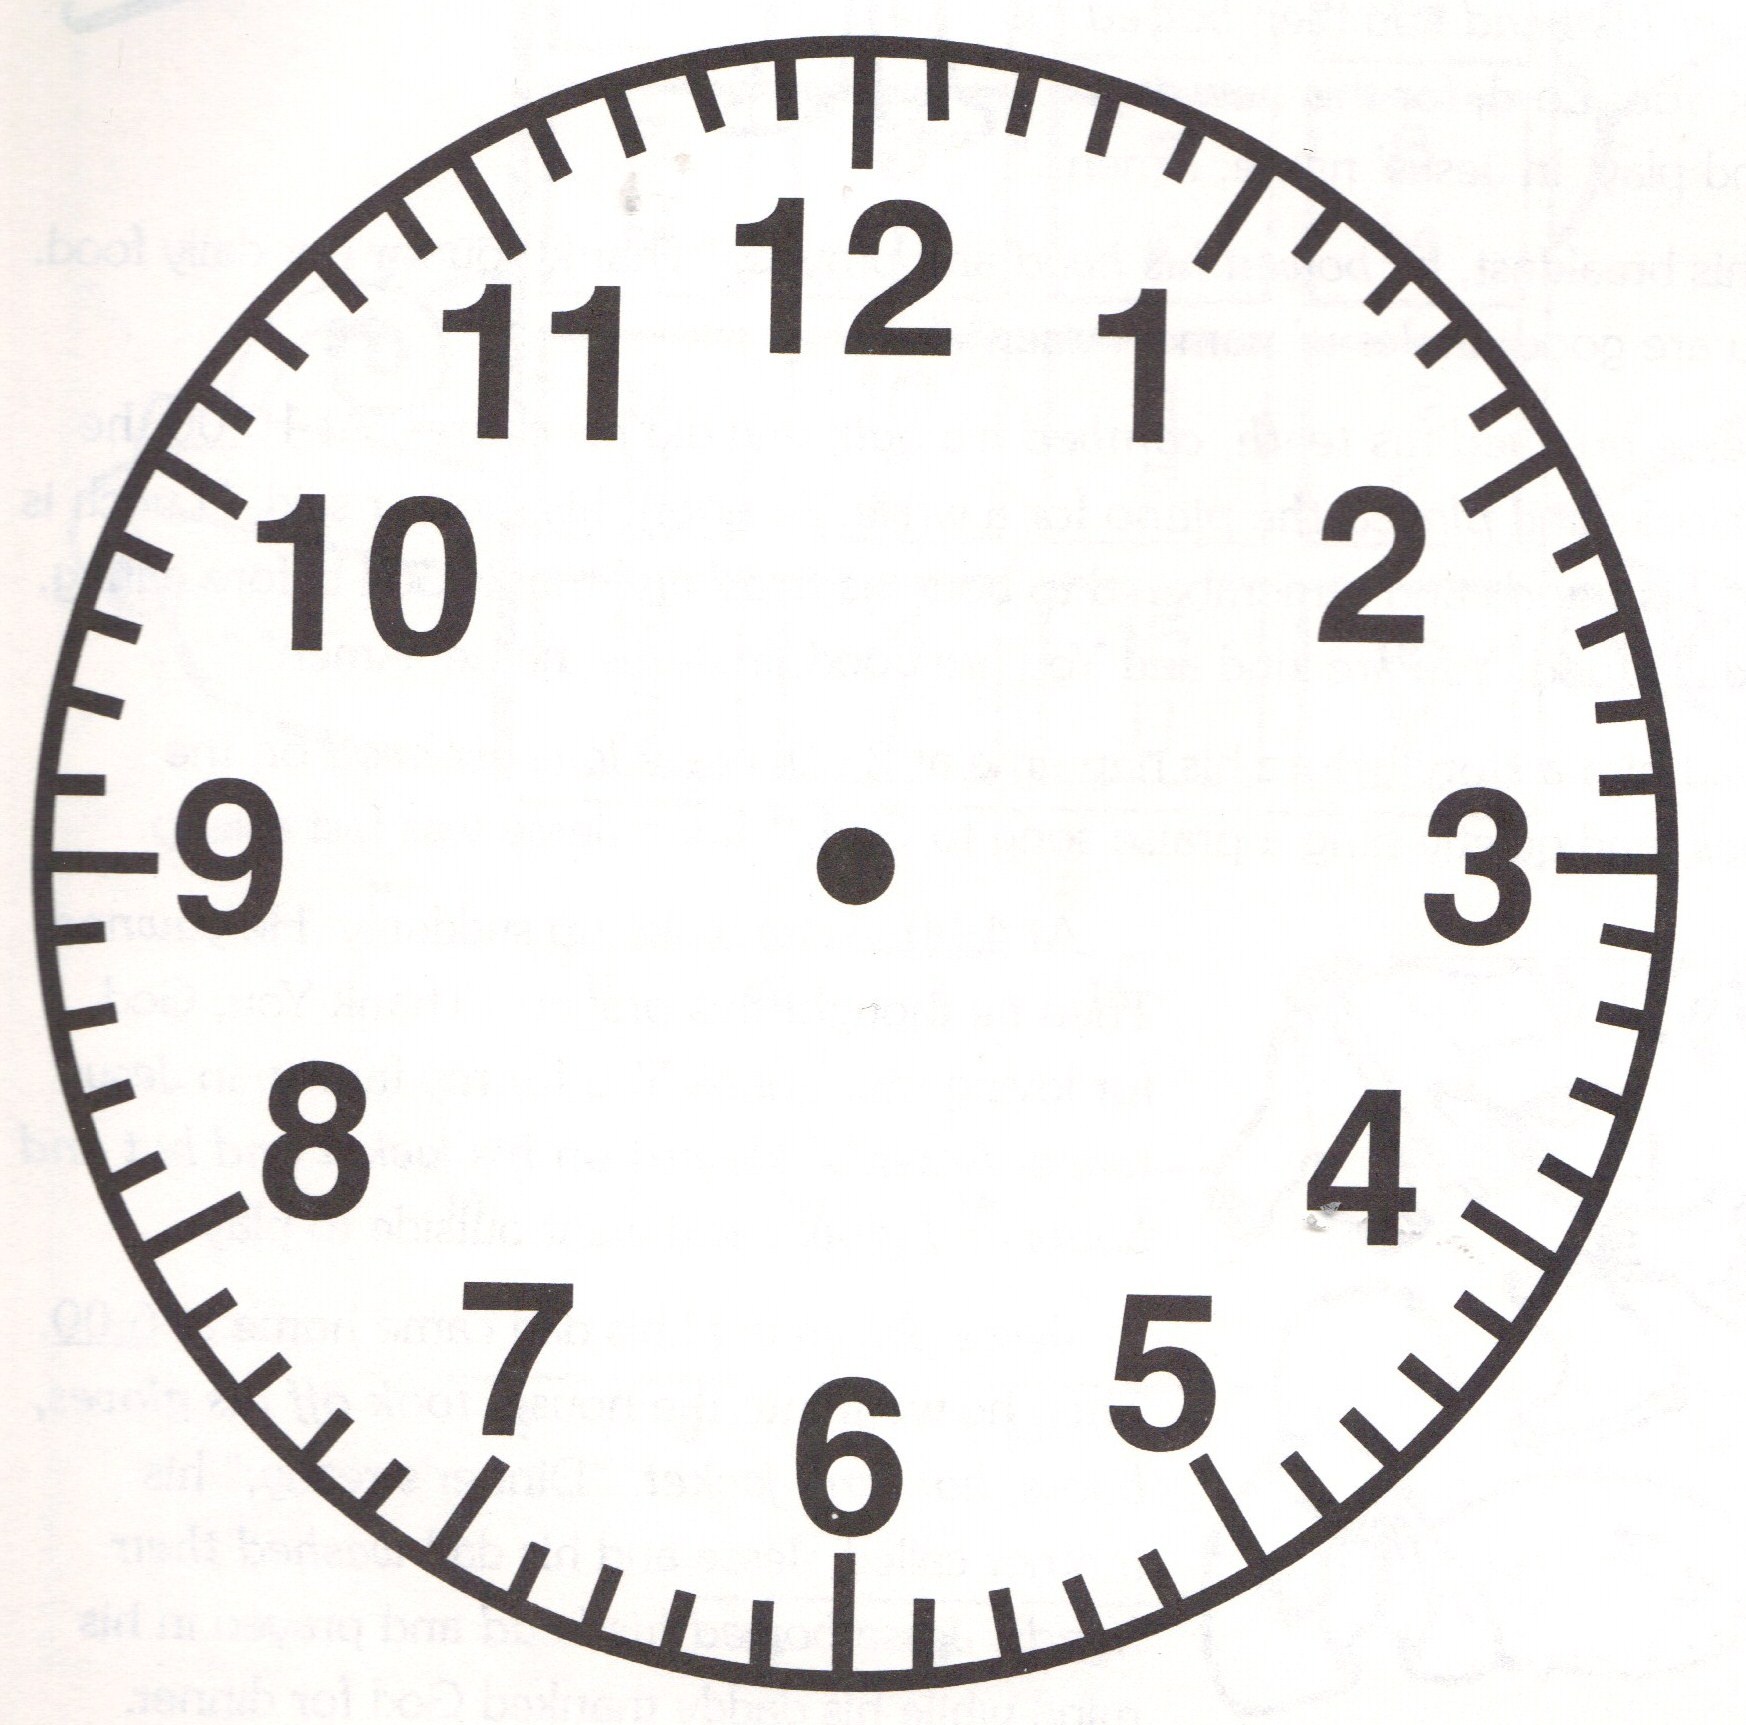 Free Analog Clock Without Hands, Download Free Clip Art